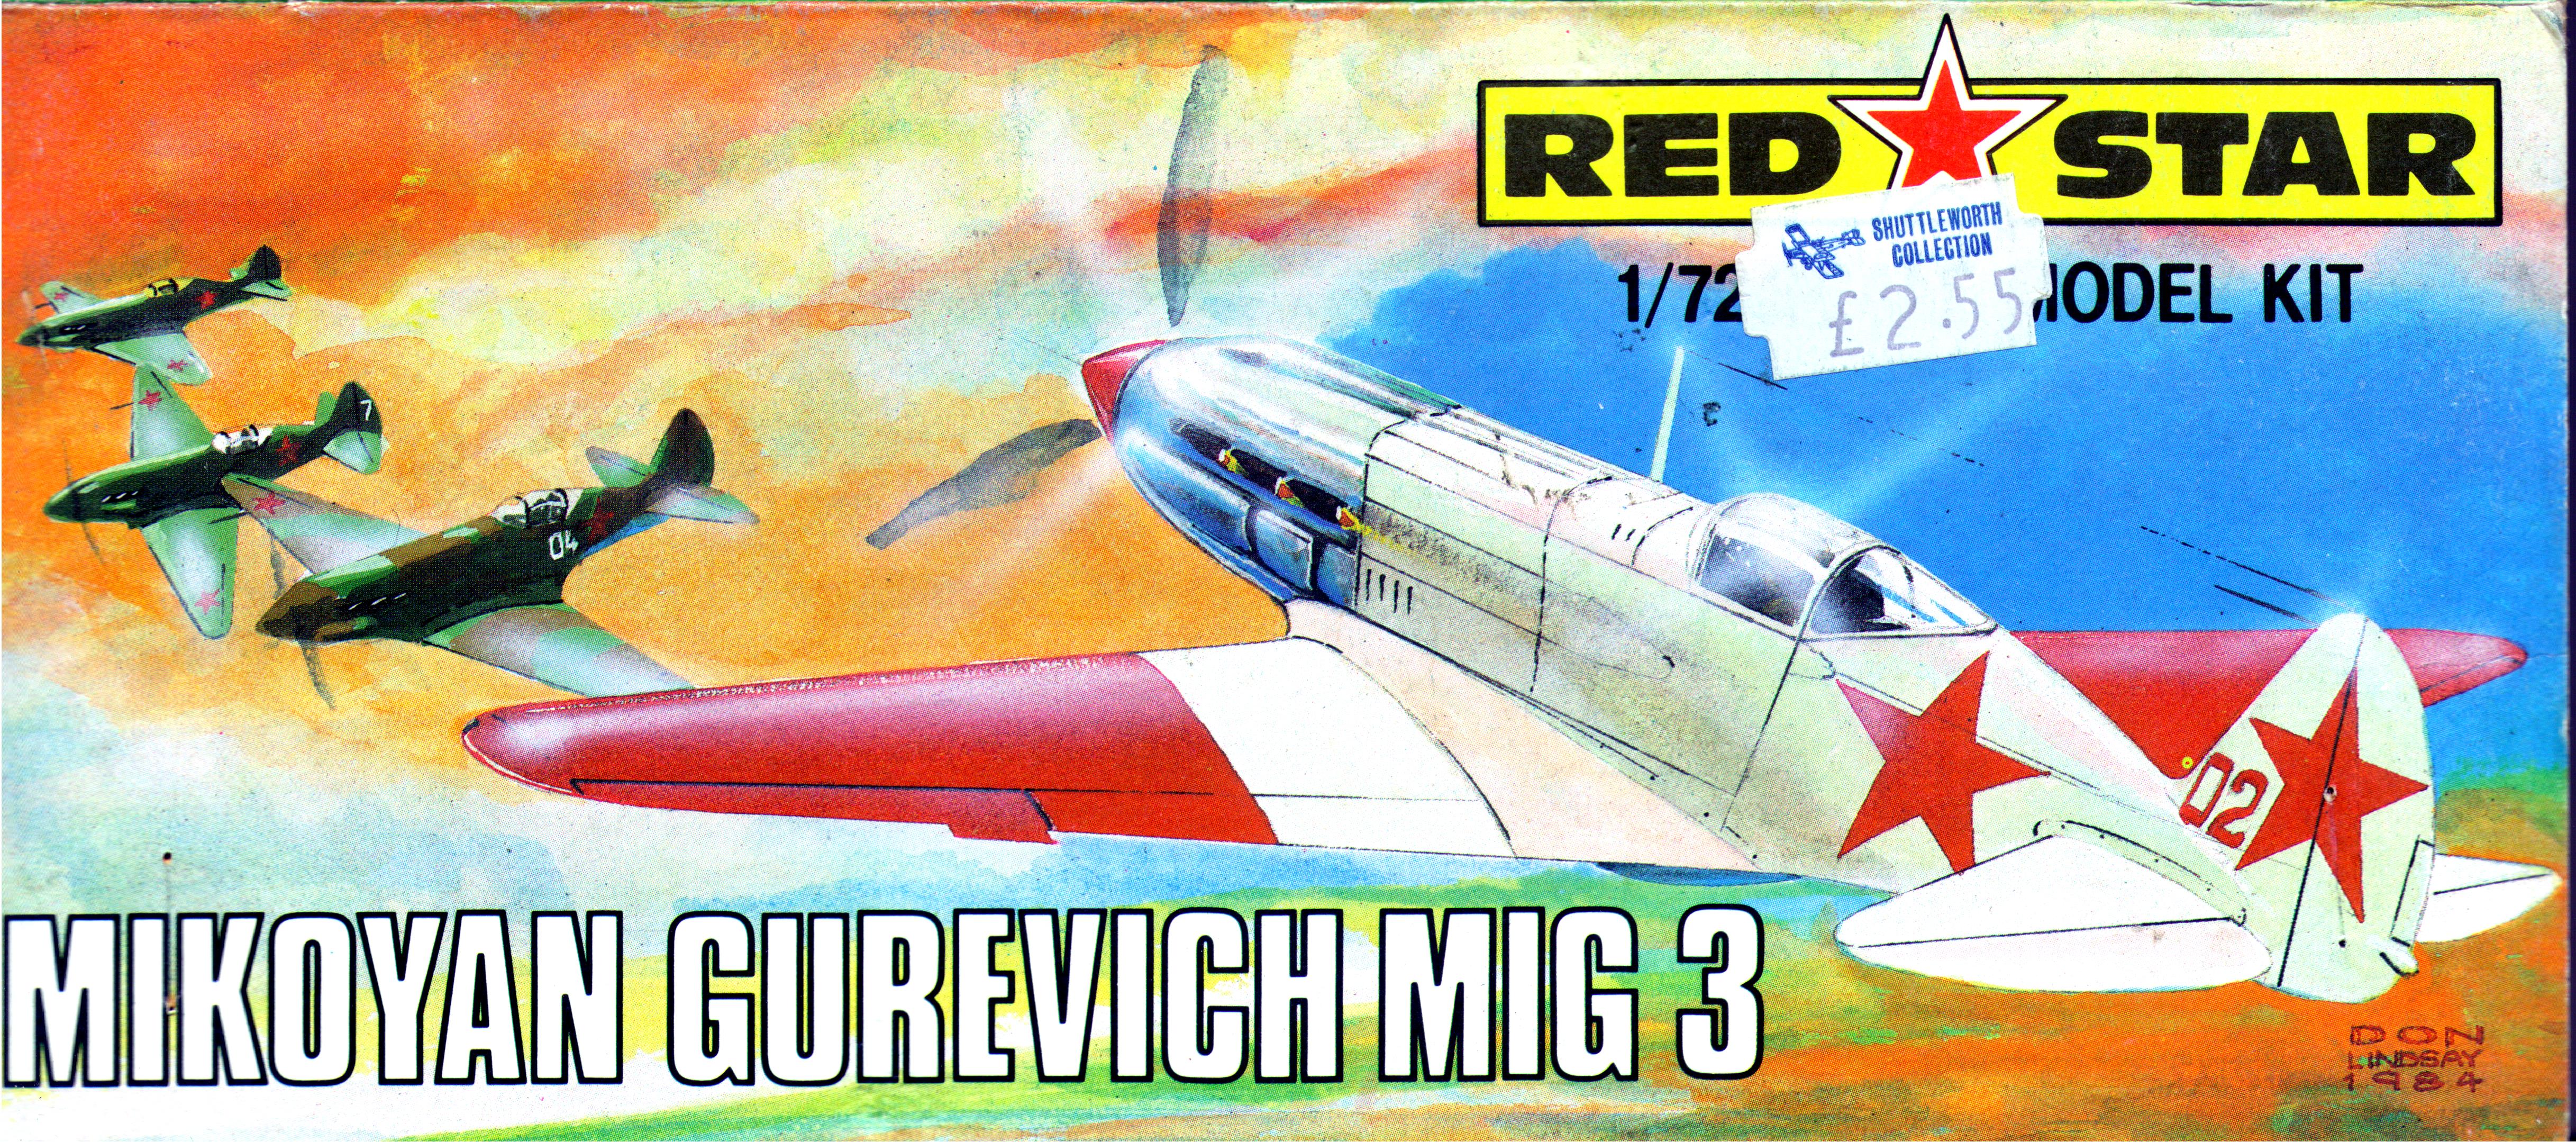 Red Star RS101 Mikoyan and Gurevich MiG-3, Red Star Model Kits Ltd, 1984 Header card